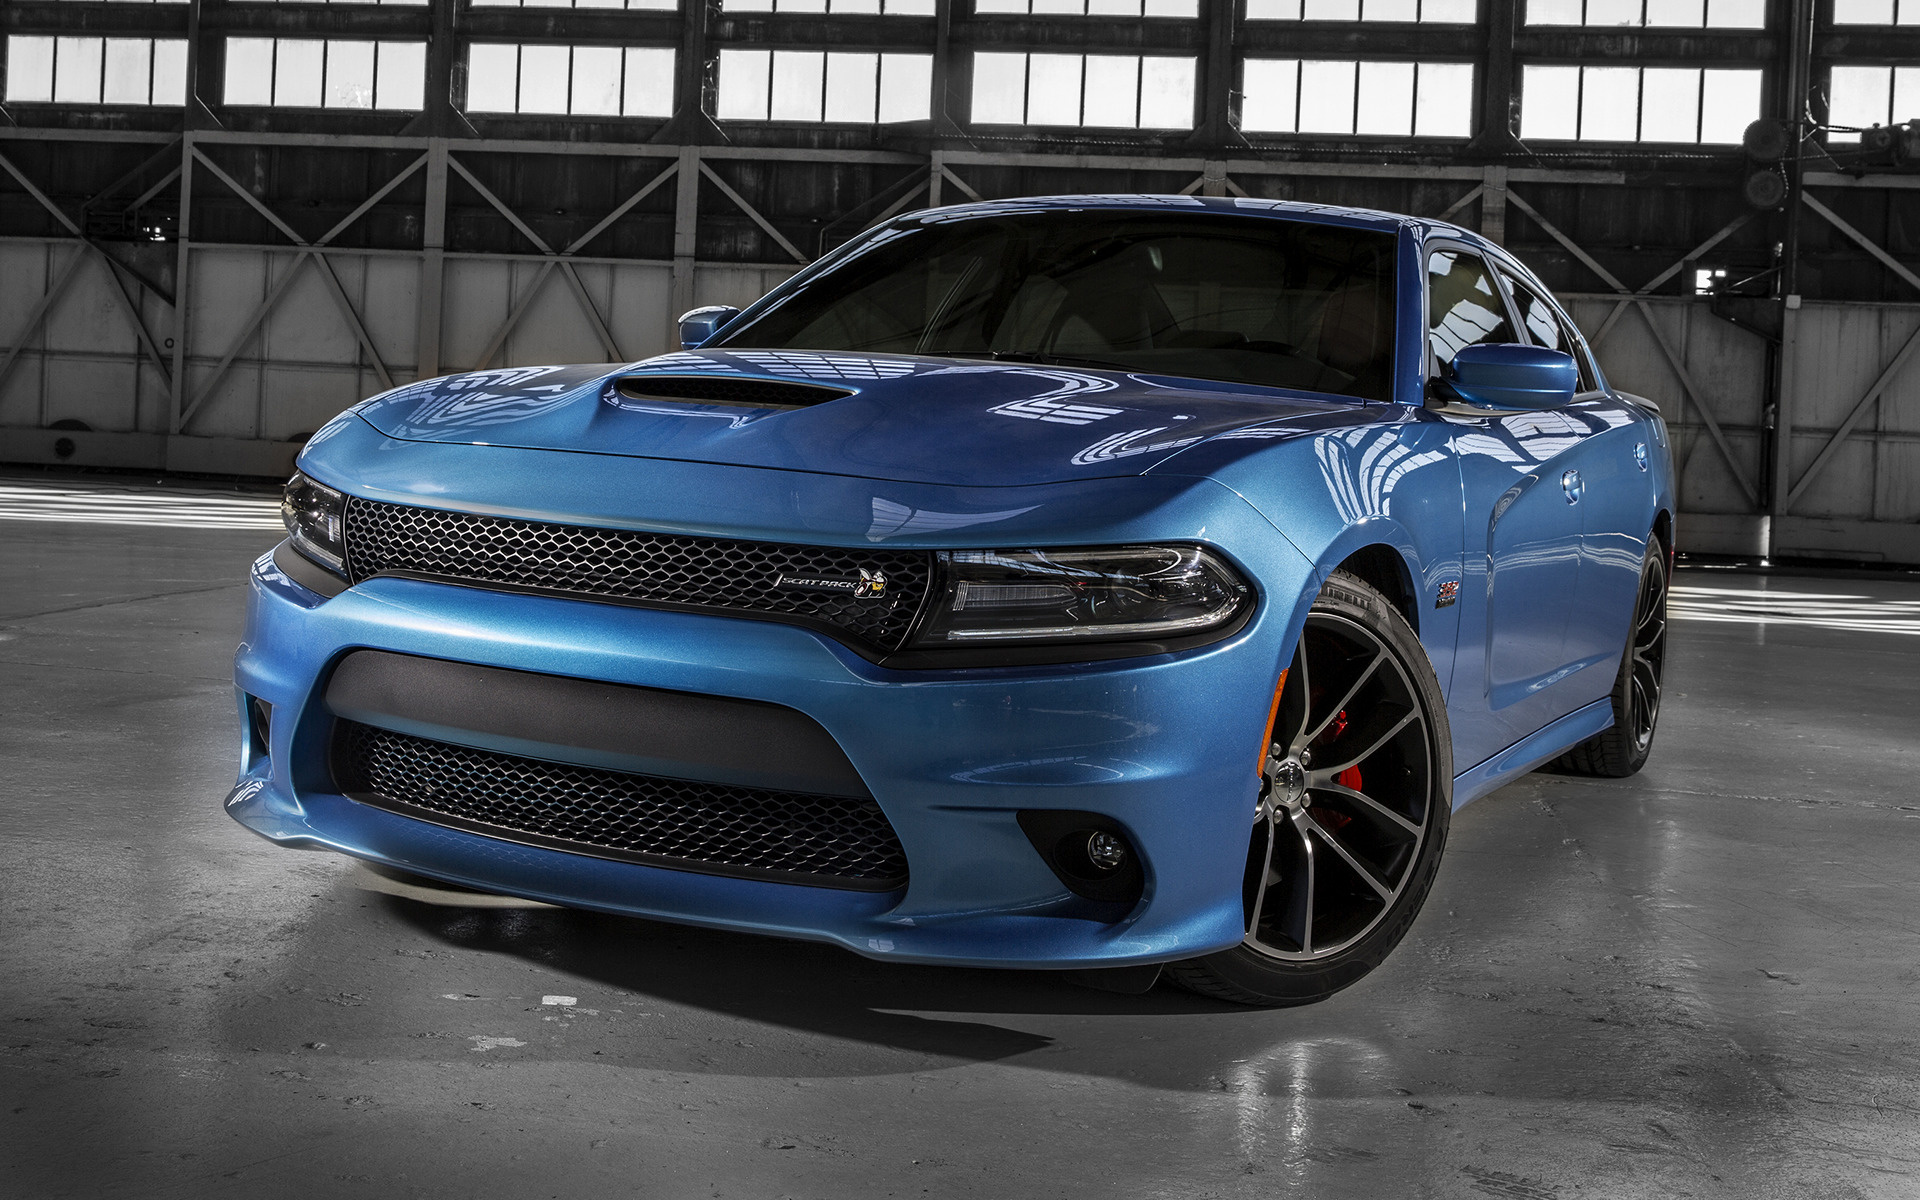 Dodge Charger 2018 Blue - HD Wallpaper 